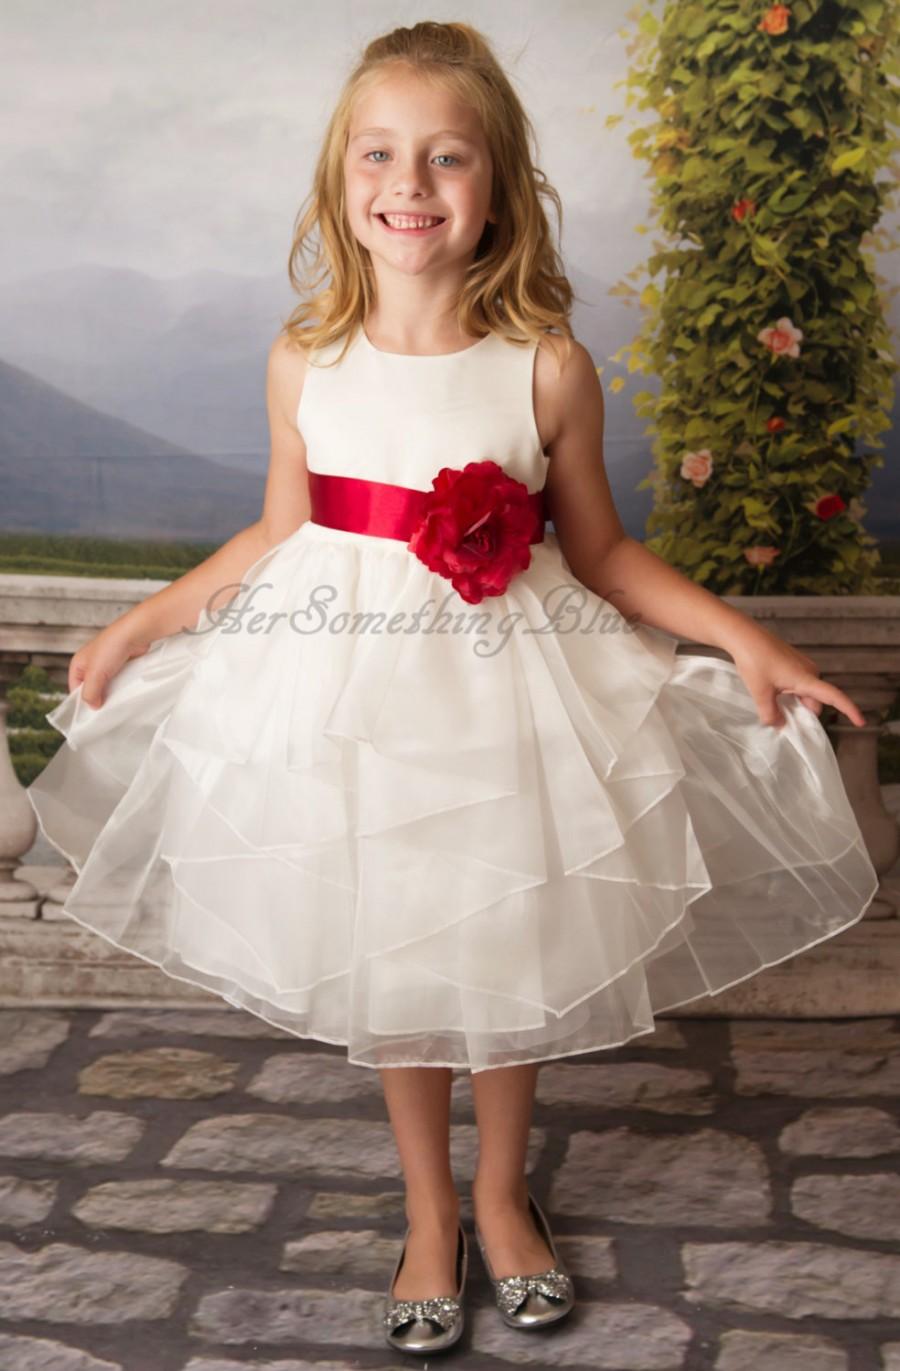 BRIDESMAID INFANT TODDLER PAGEANT RECITAL PARTY GOWN FLOWER GIRL DRESS WHITE JR 